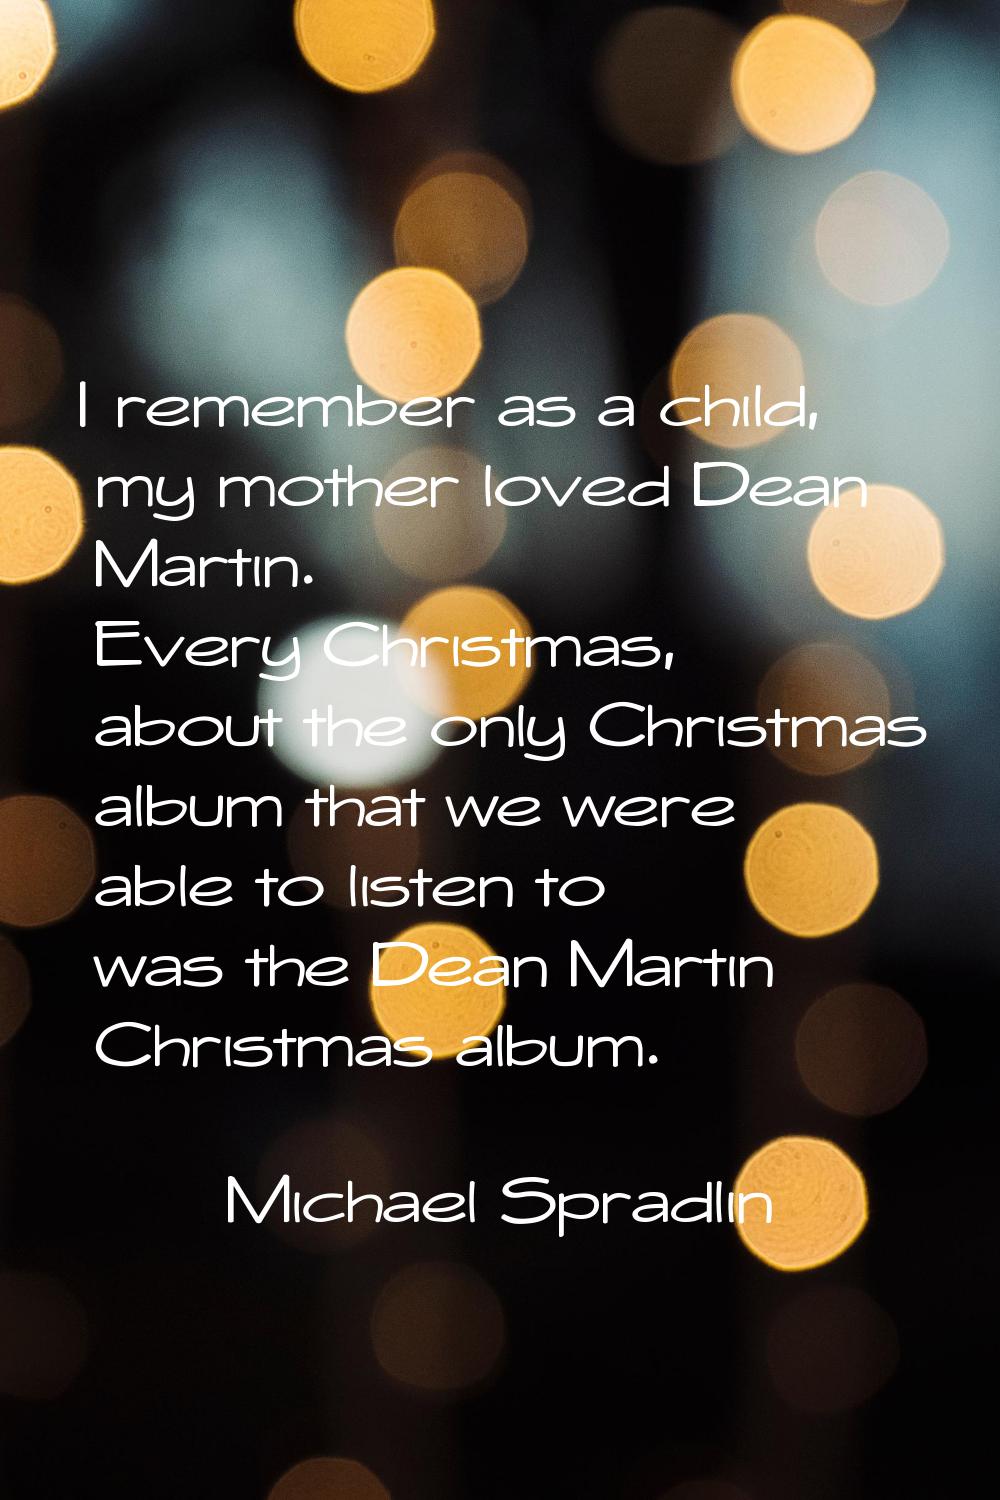 I remember as a child, my mother loved Dean Martin. Every Christmas, about the only Christmas album